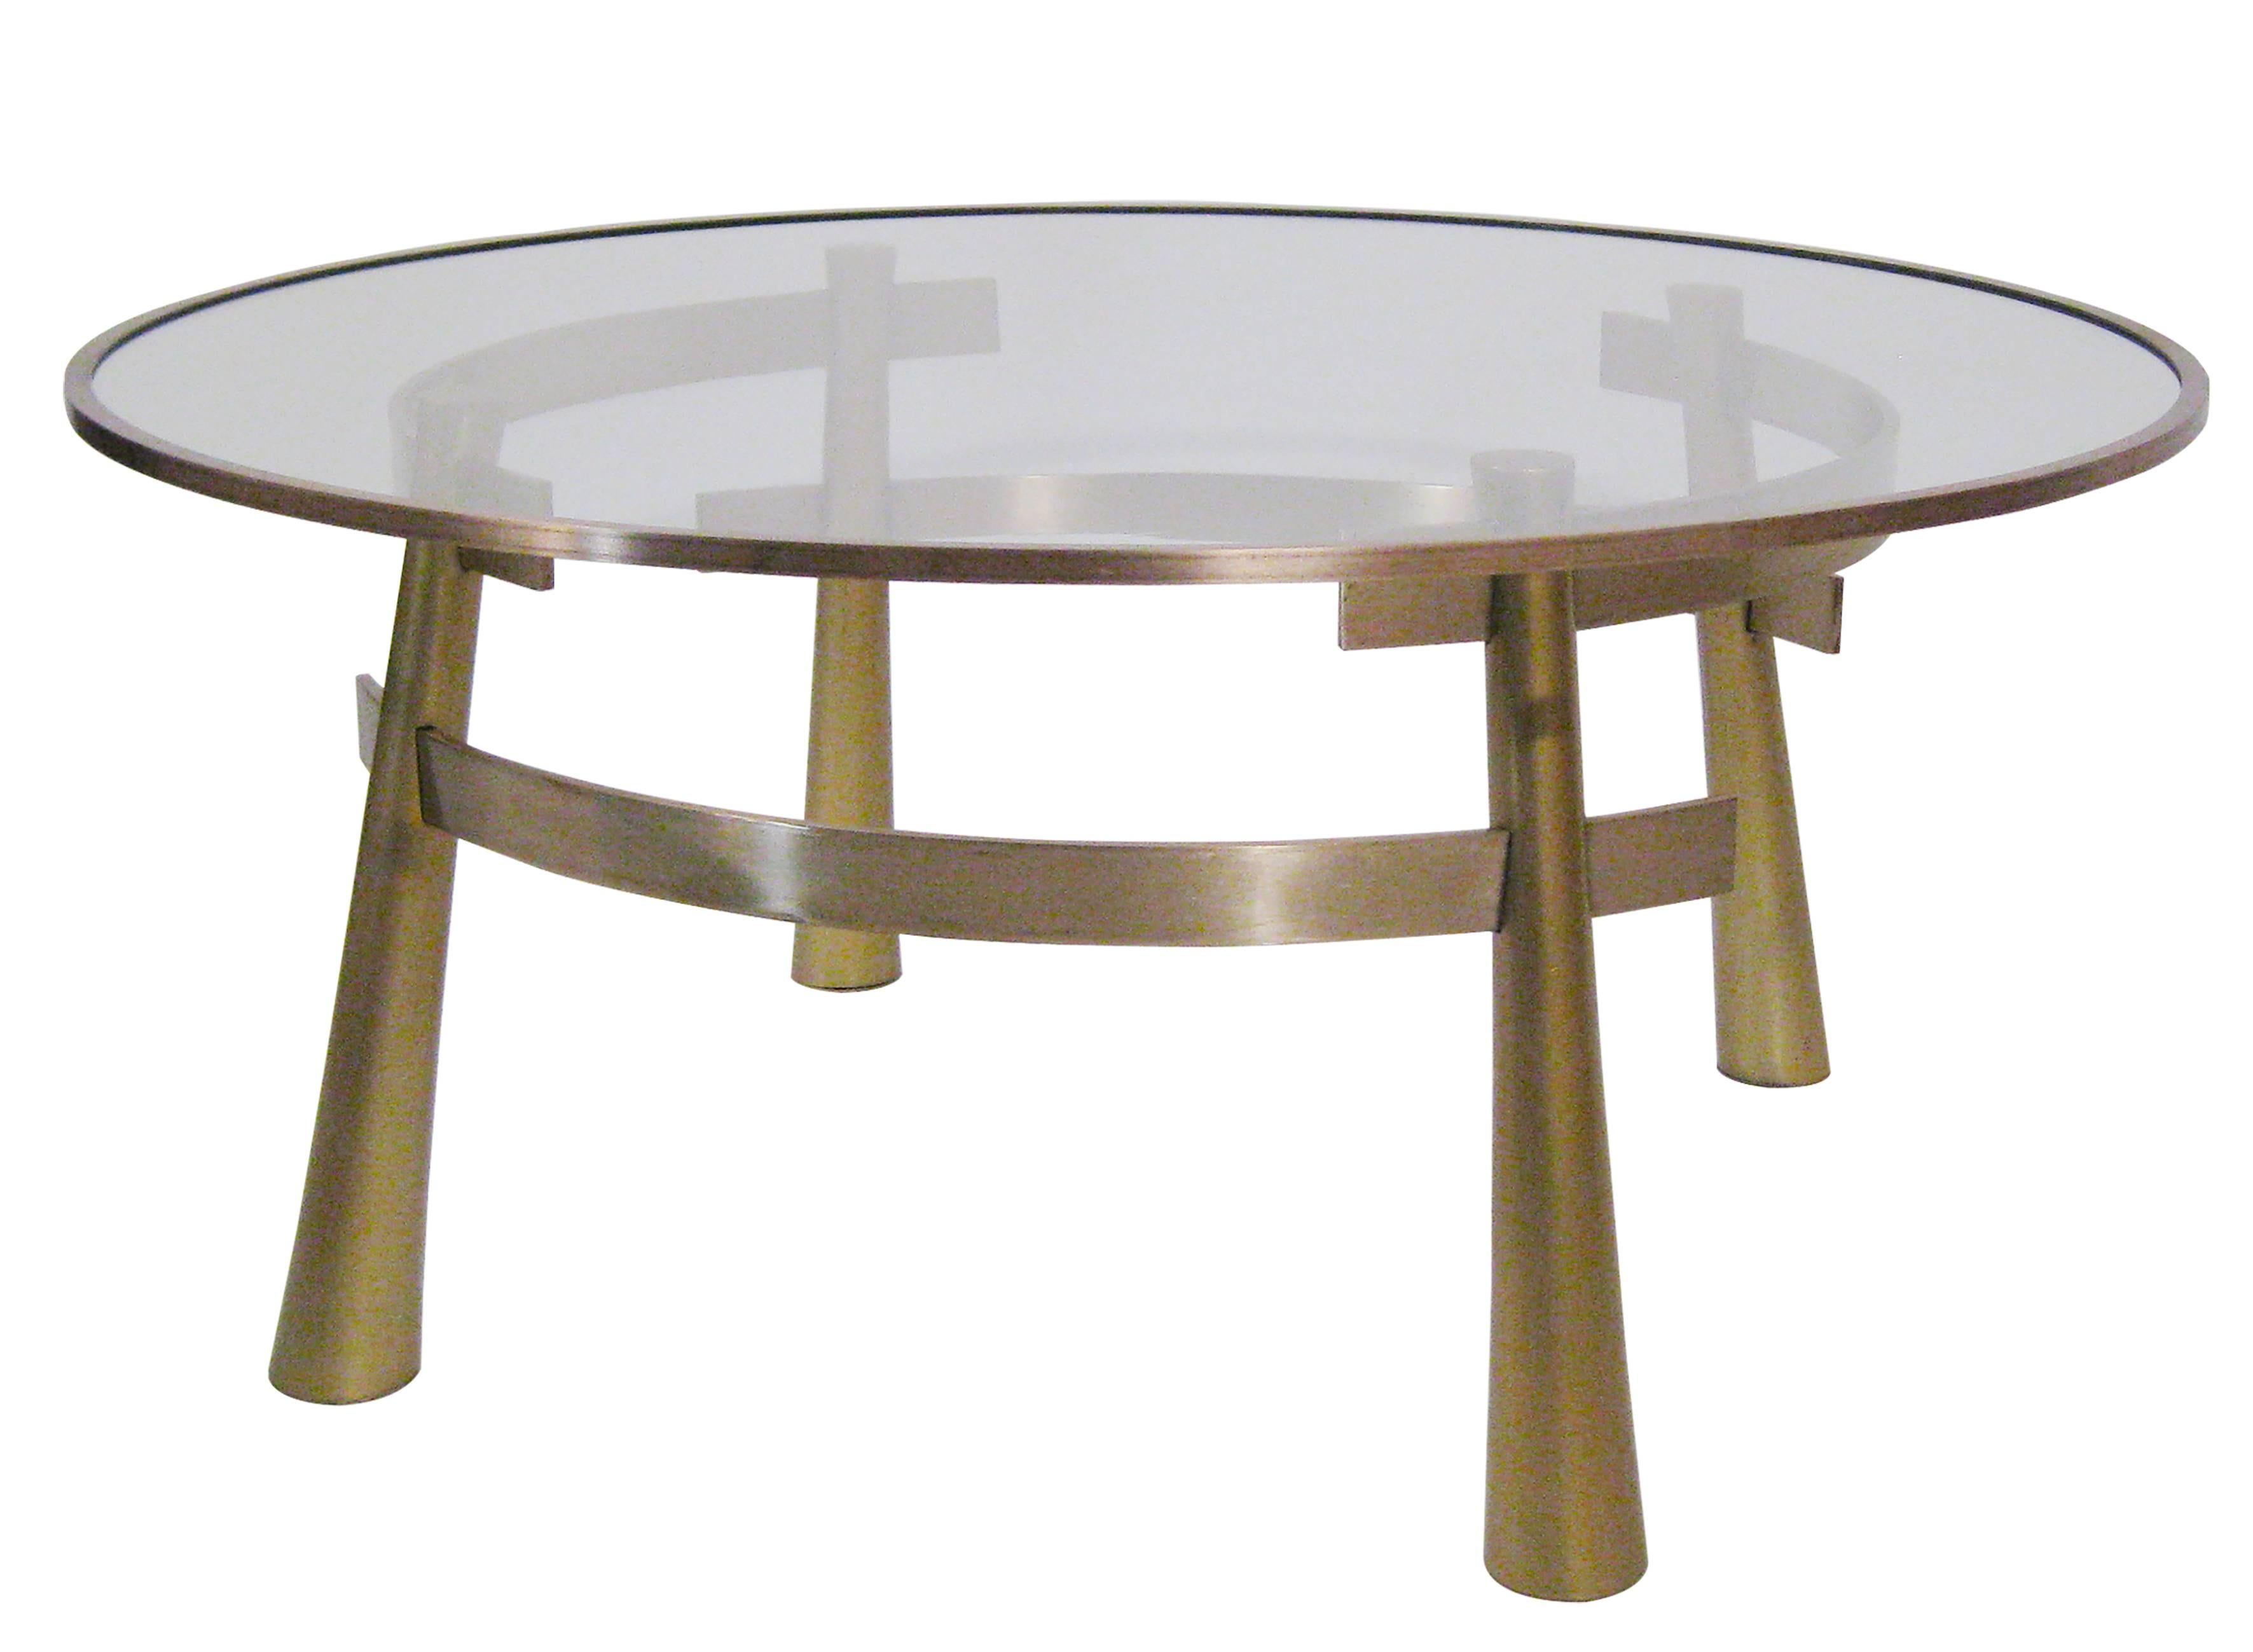 
Brass and glass-top table that subtlety reflects the Eastern tastes from the sixties. 